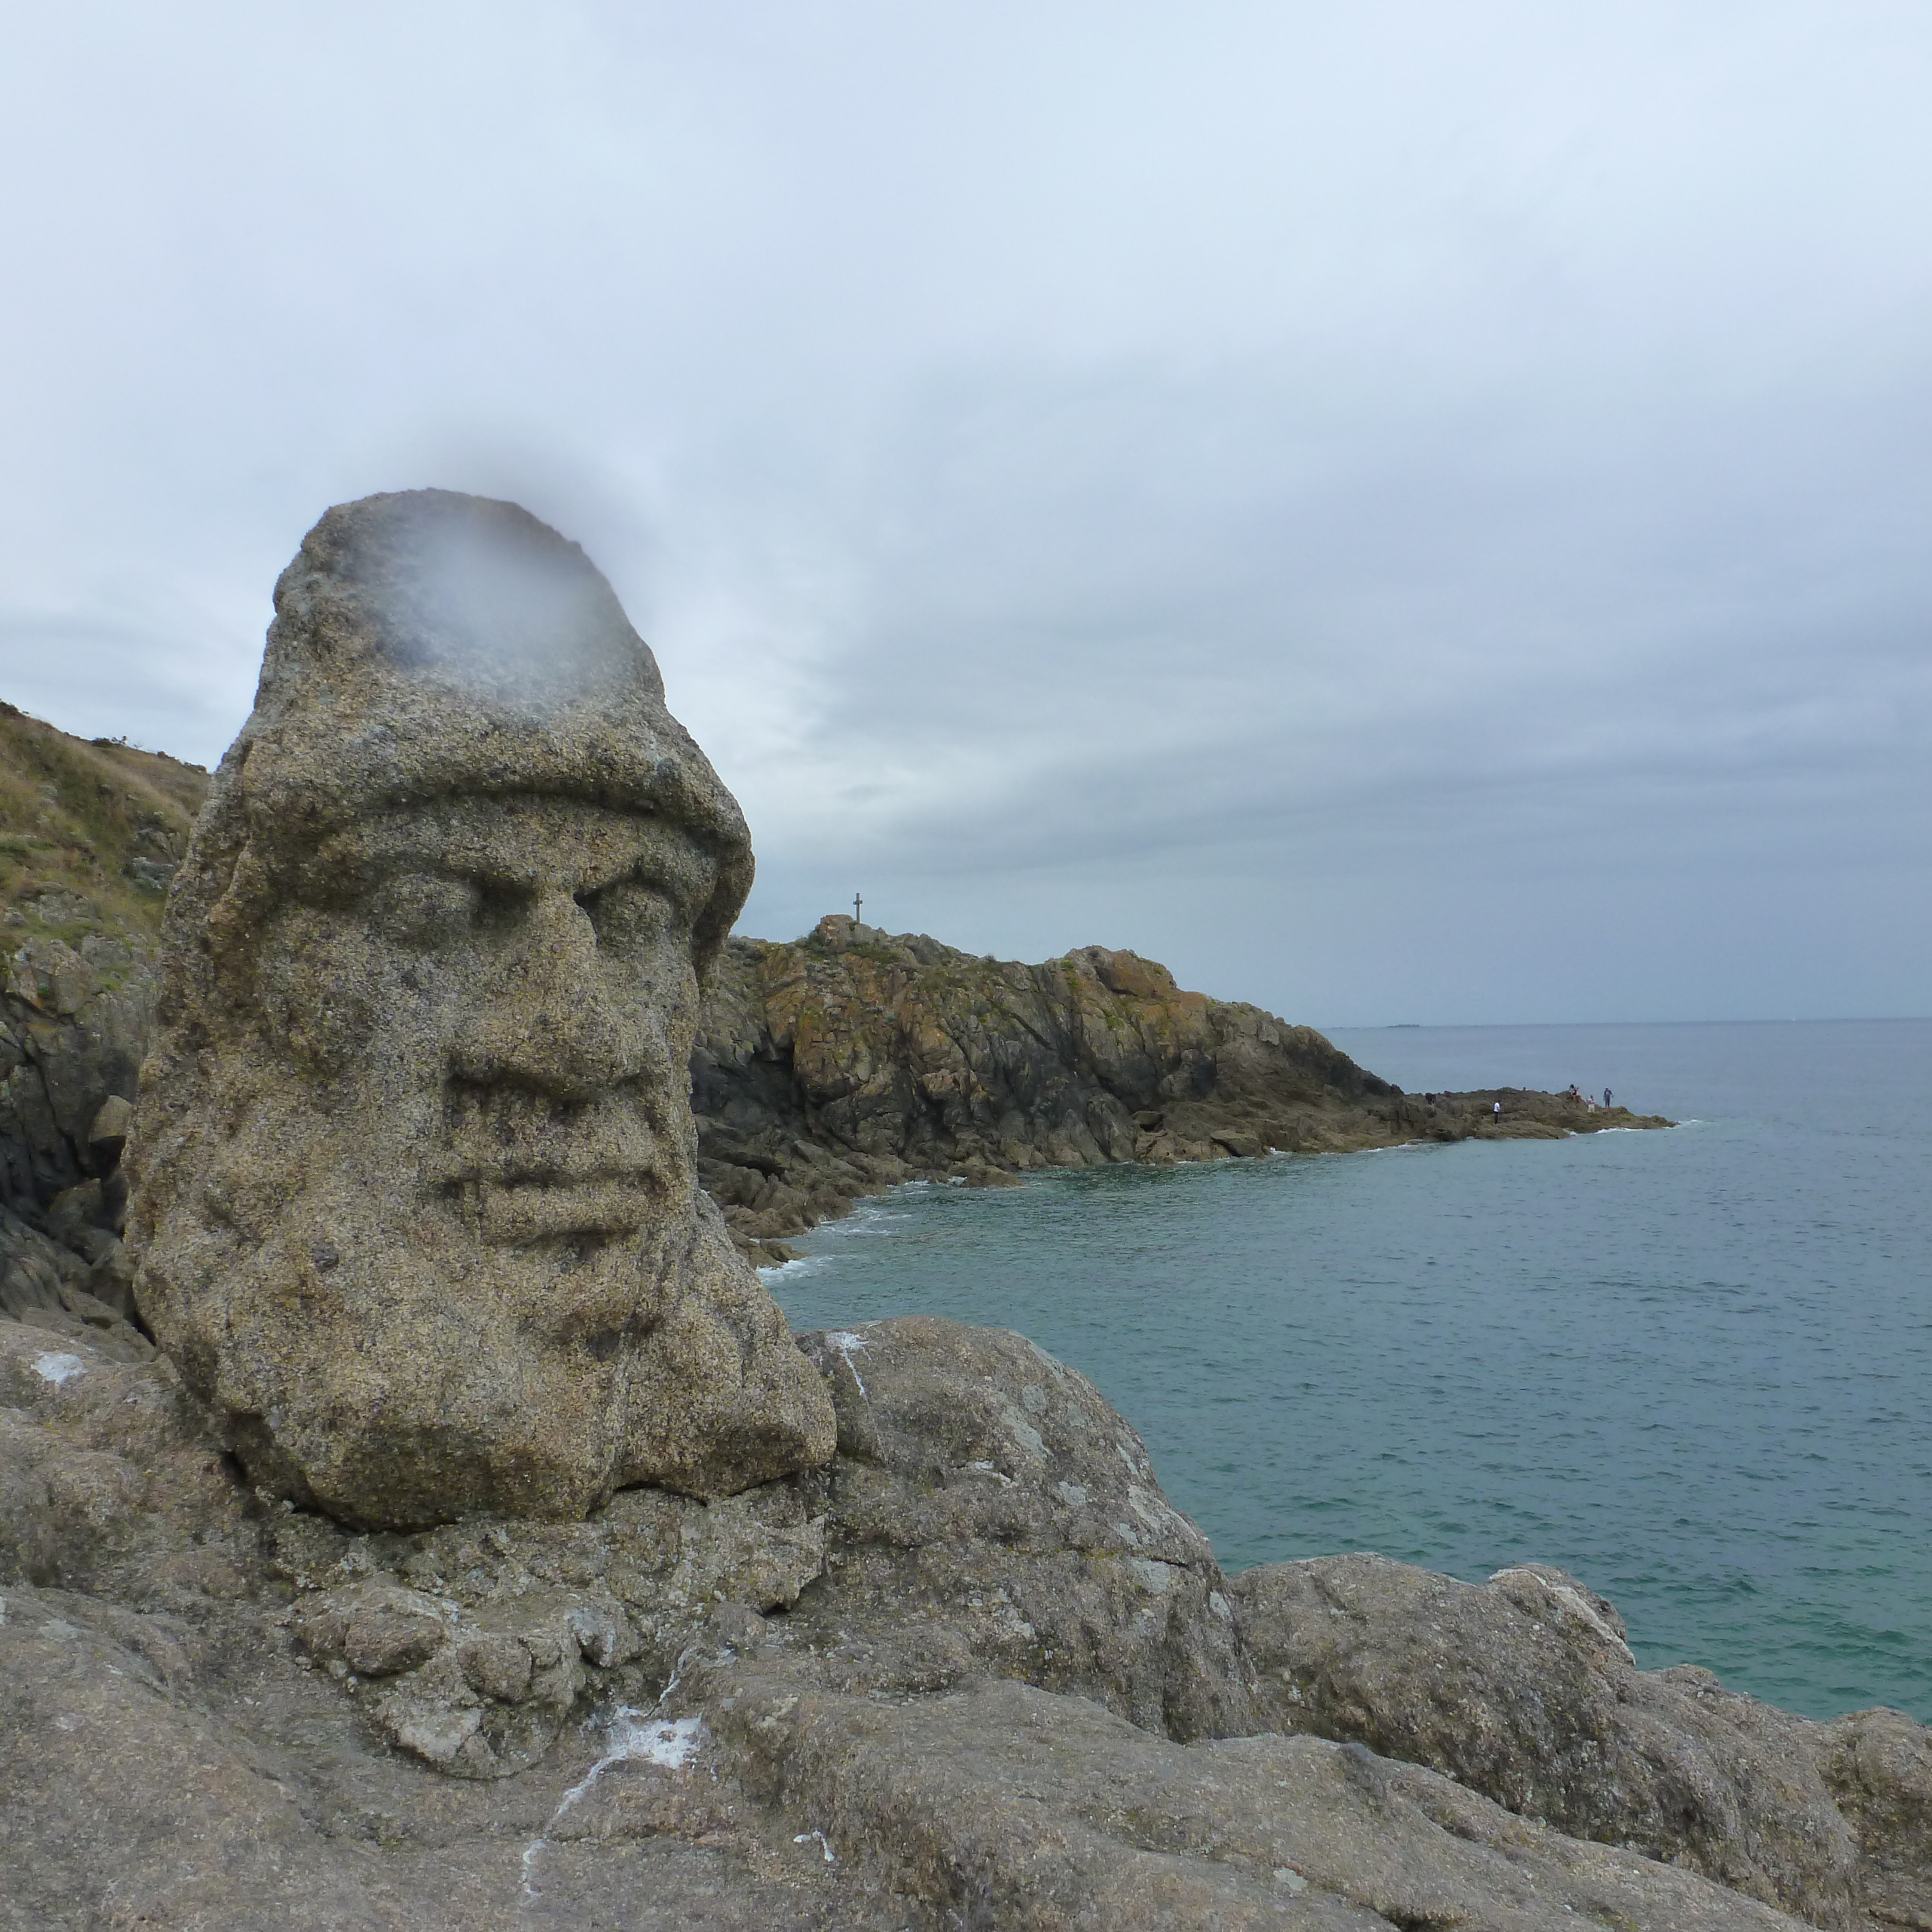 The French Cliff carved into Legends of Old by One Mute Abbot